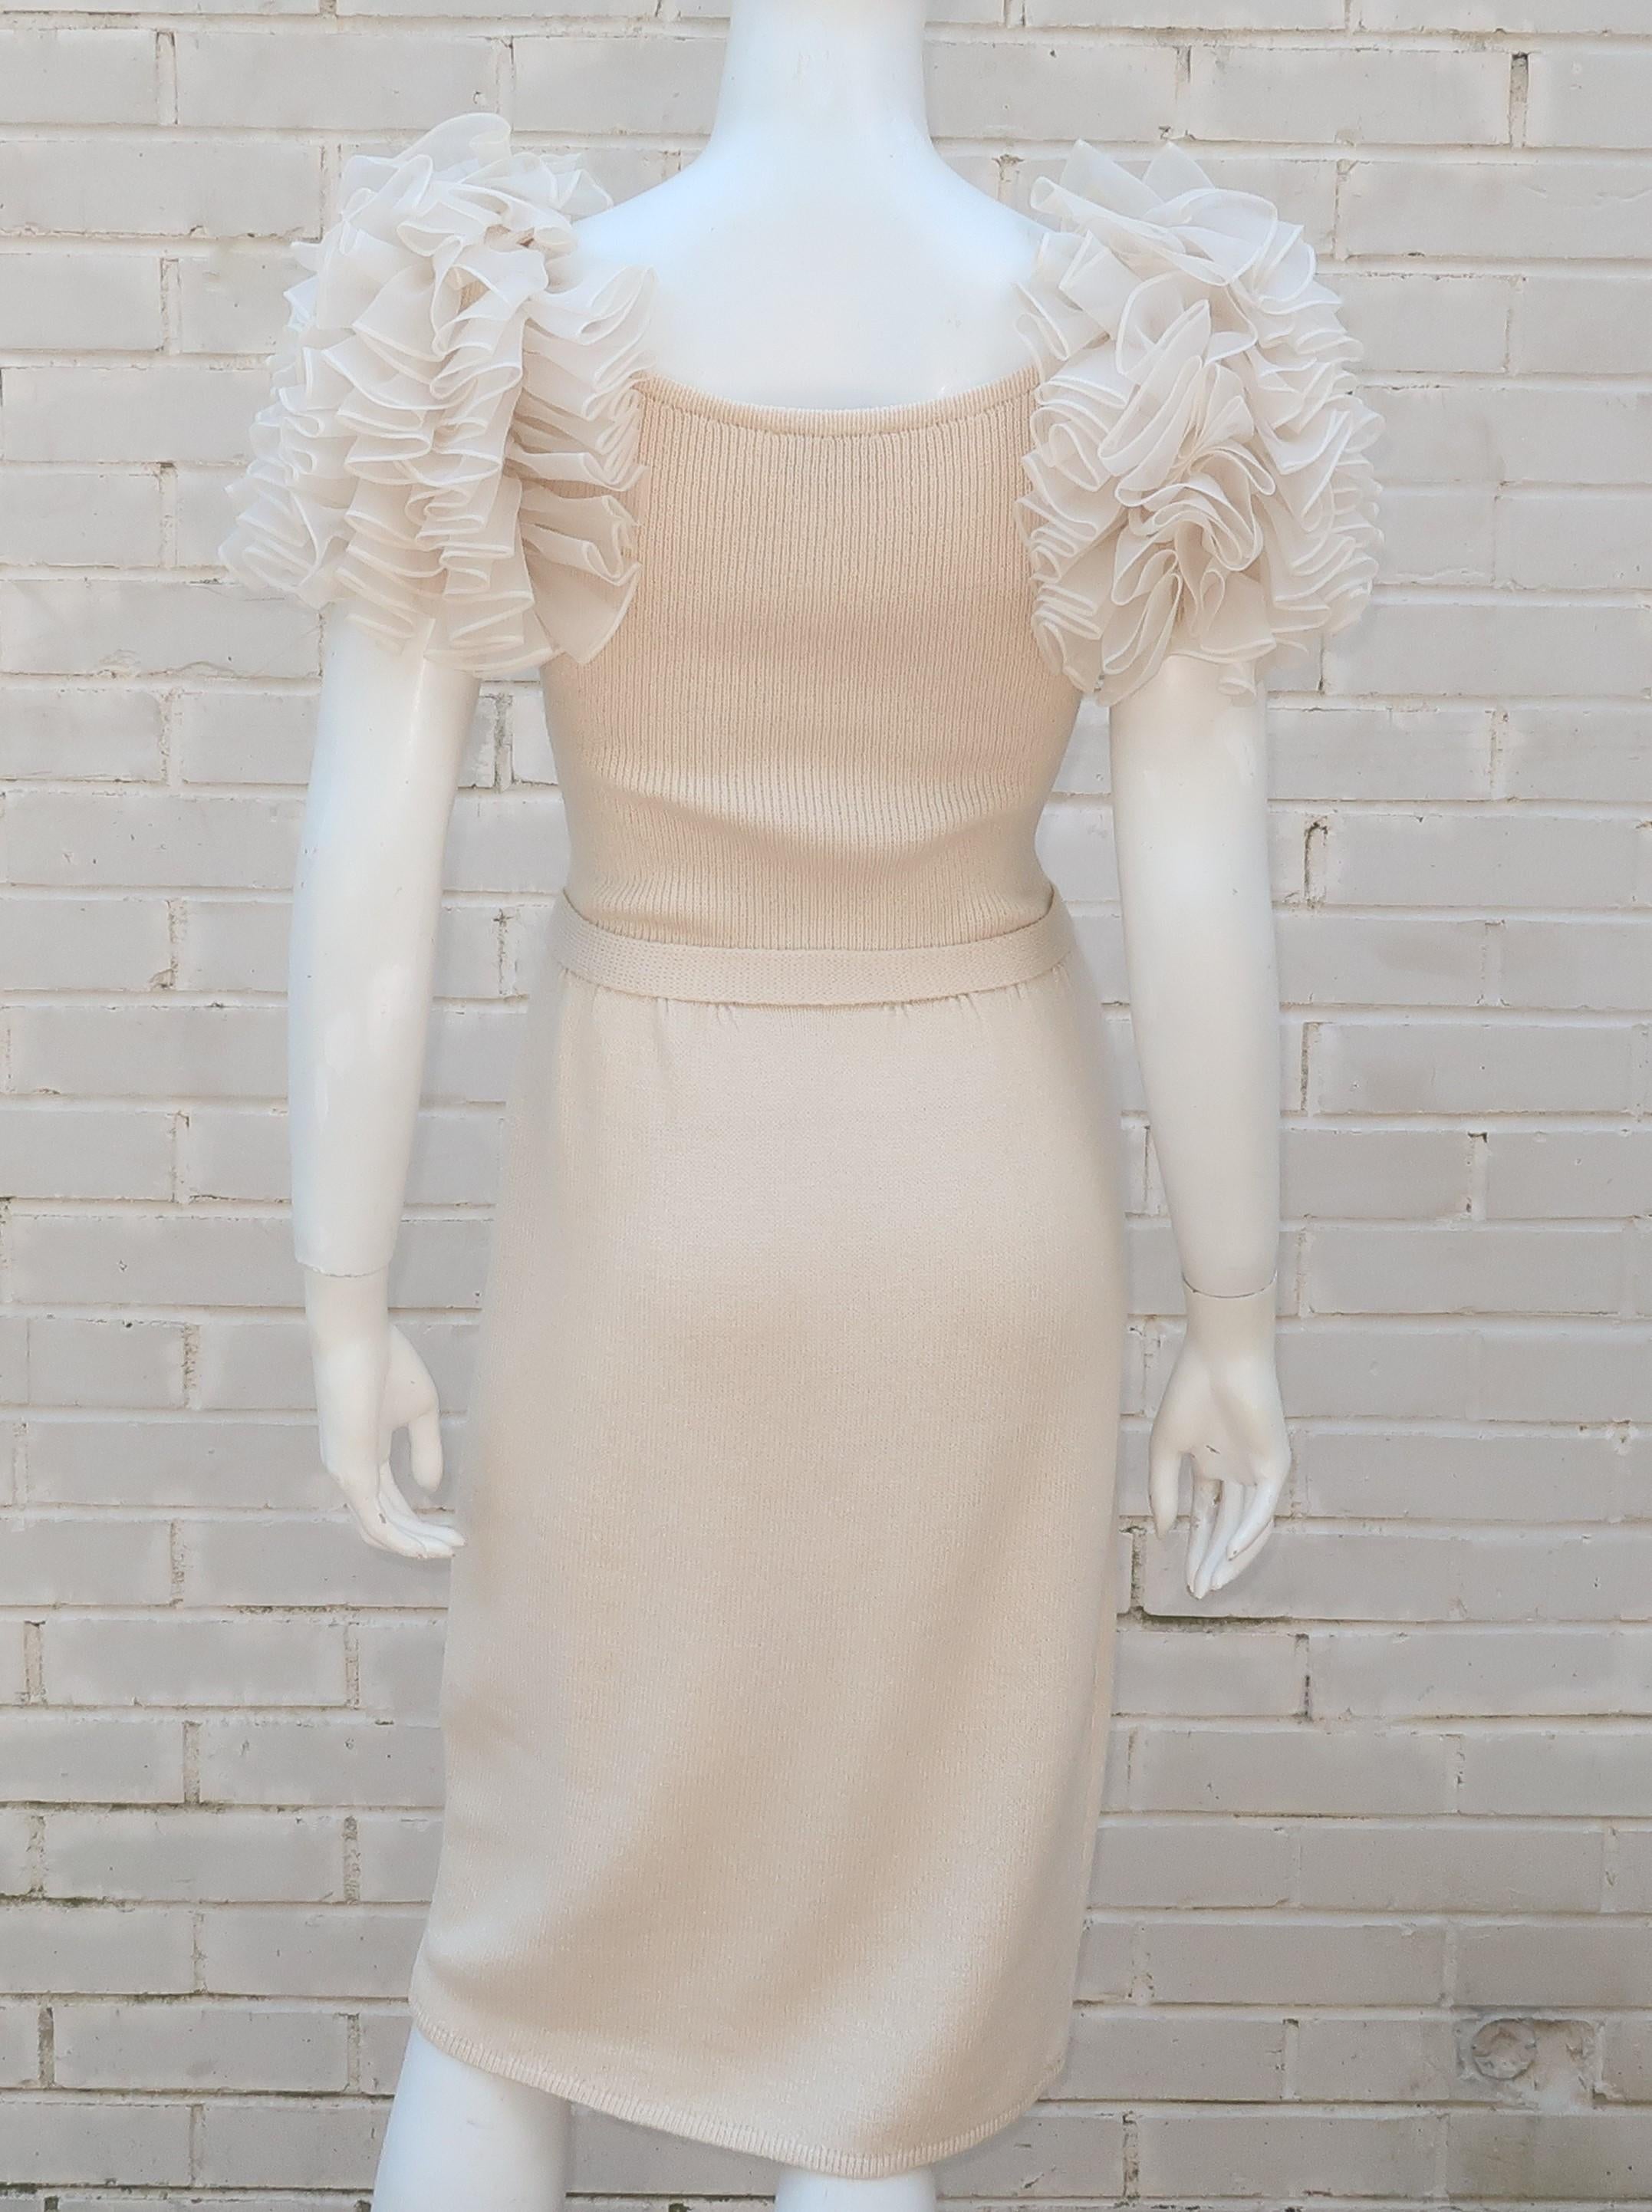 Ivory White Knit Cocktail Dress With Ruffled Sleeves & Rhinestones, C.1980 6